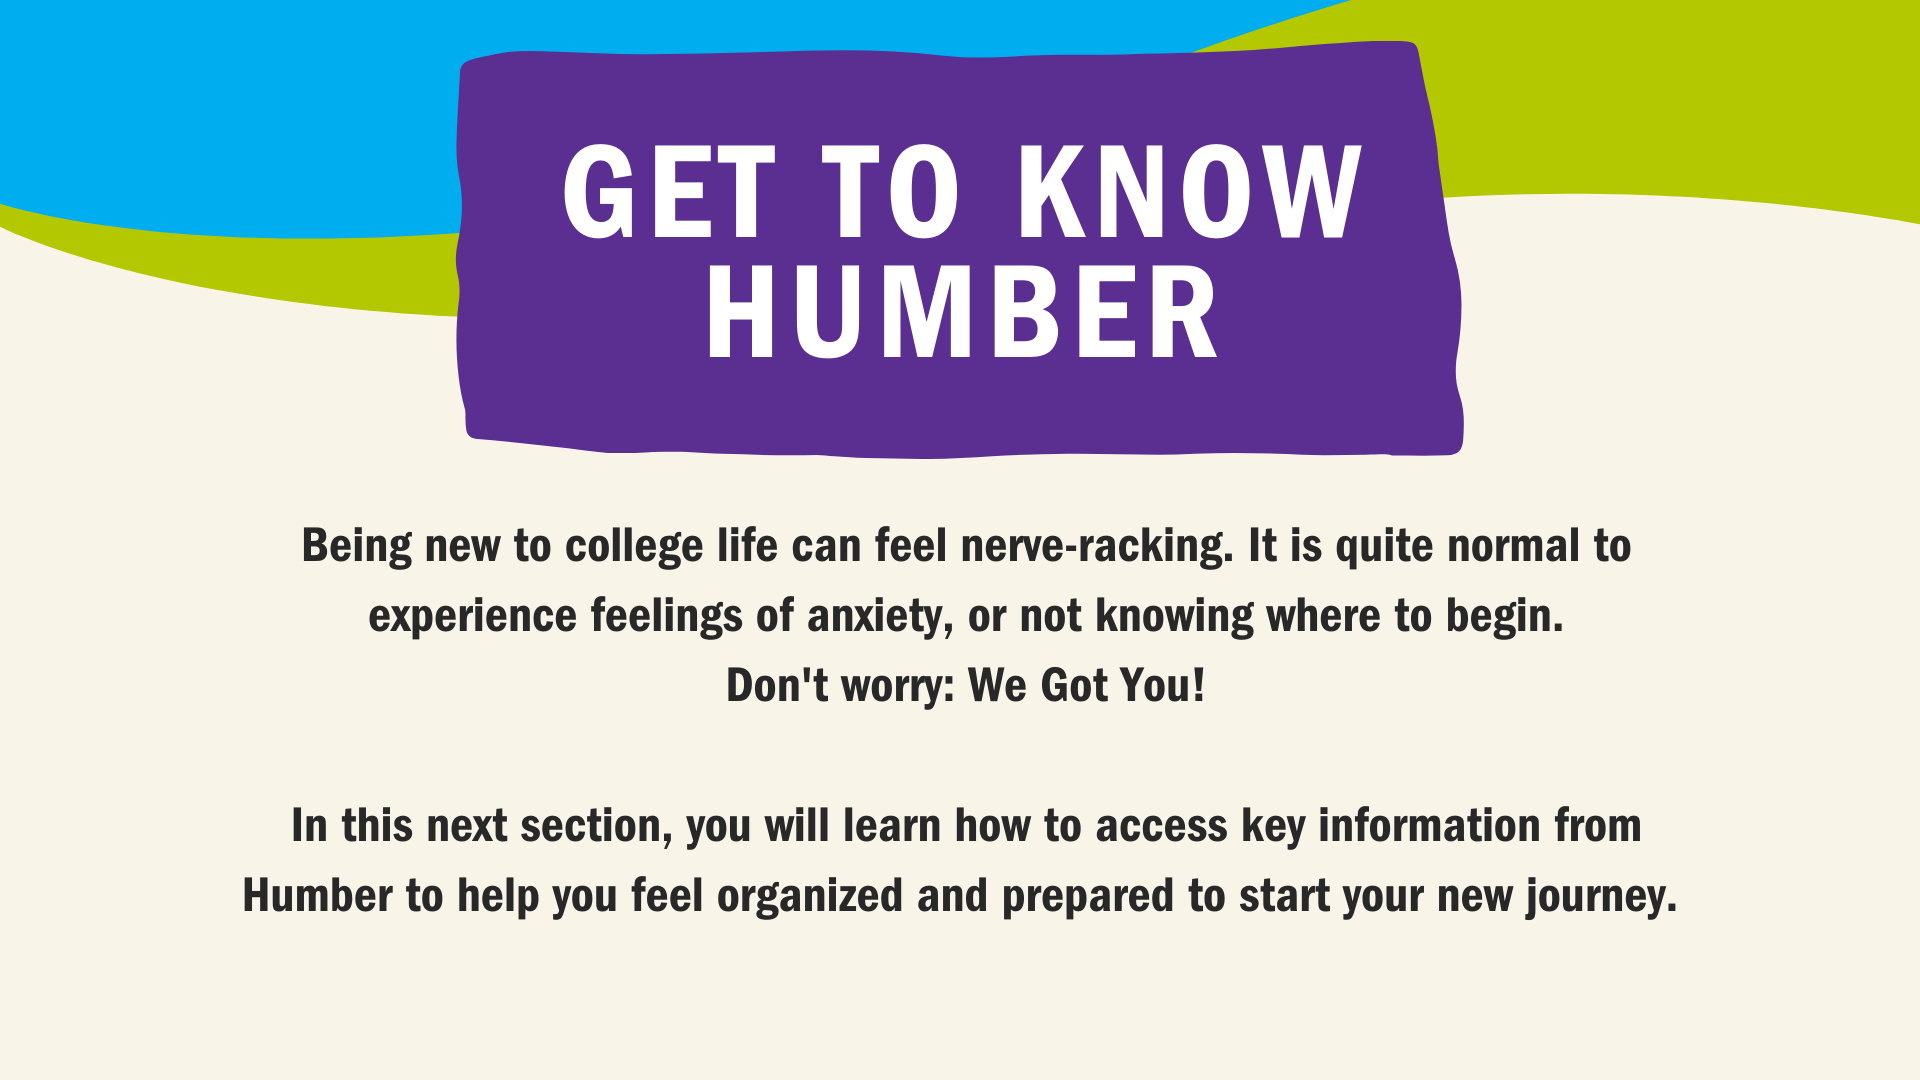 Being new to College life while learning remotely from home can feel nerve-racking. It is quite normal to experience feelings of fear or not knowing where to begin. But, We Got You covered! In this next section you will learn how to access key information from Humber to help you feel organized and prepared to start your new journey. 